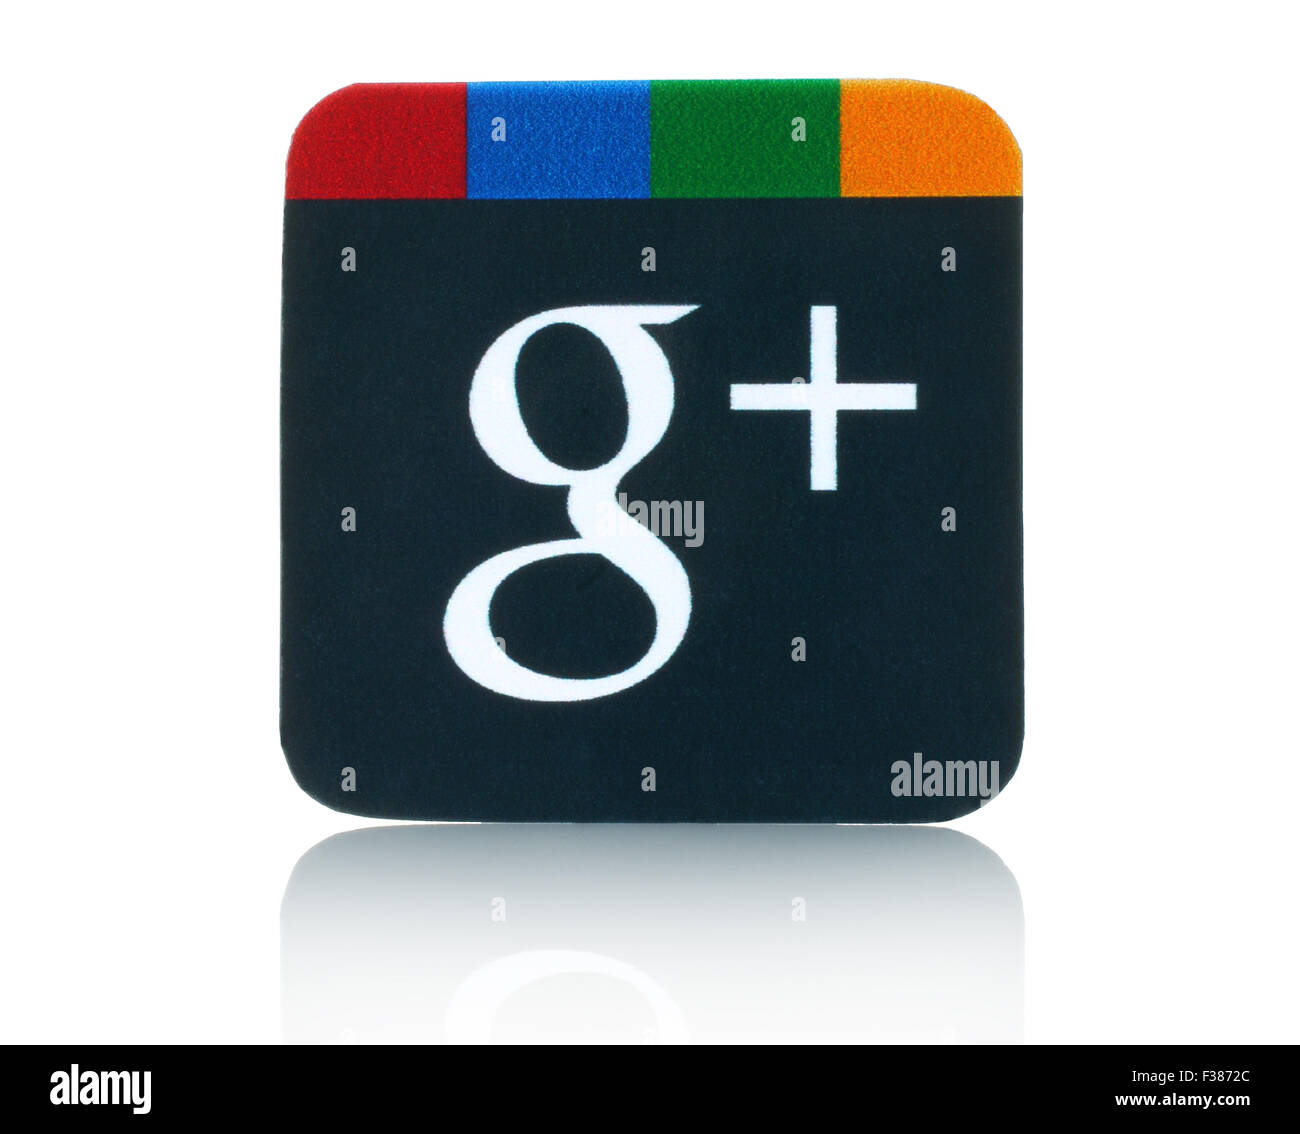 KIEV, UKRAINE - FEBRUARY 05, 2015:Google plus logotype printed on paper and placed on white background Stock Photo